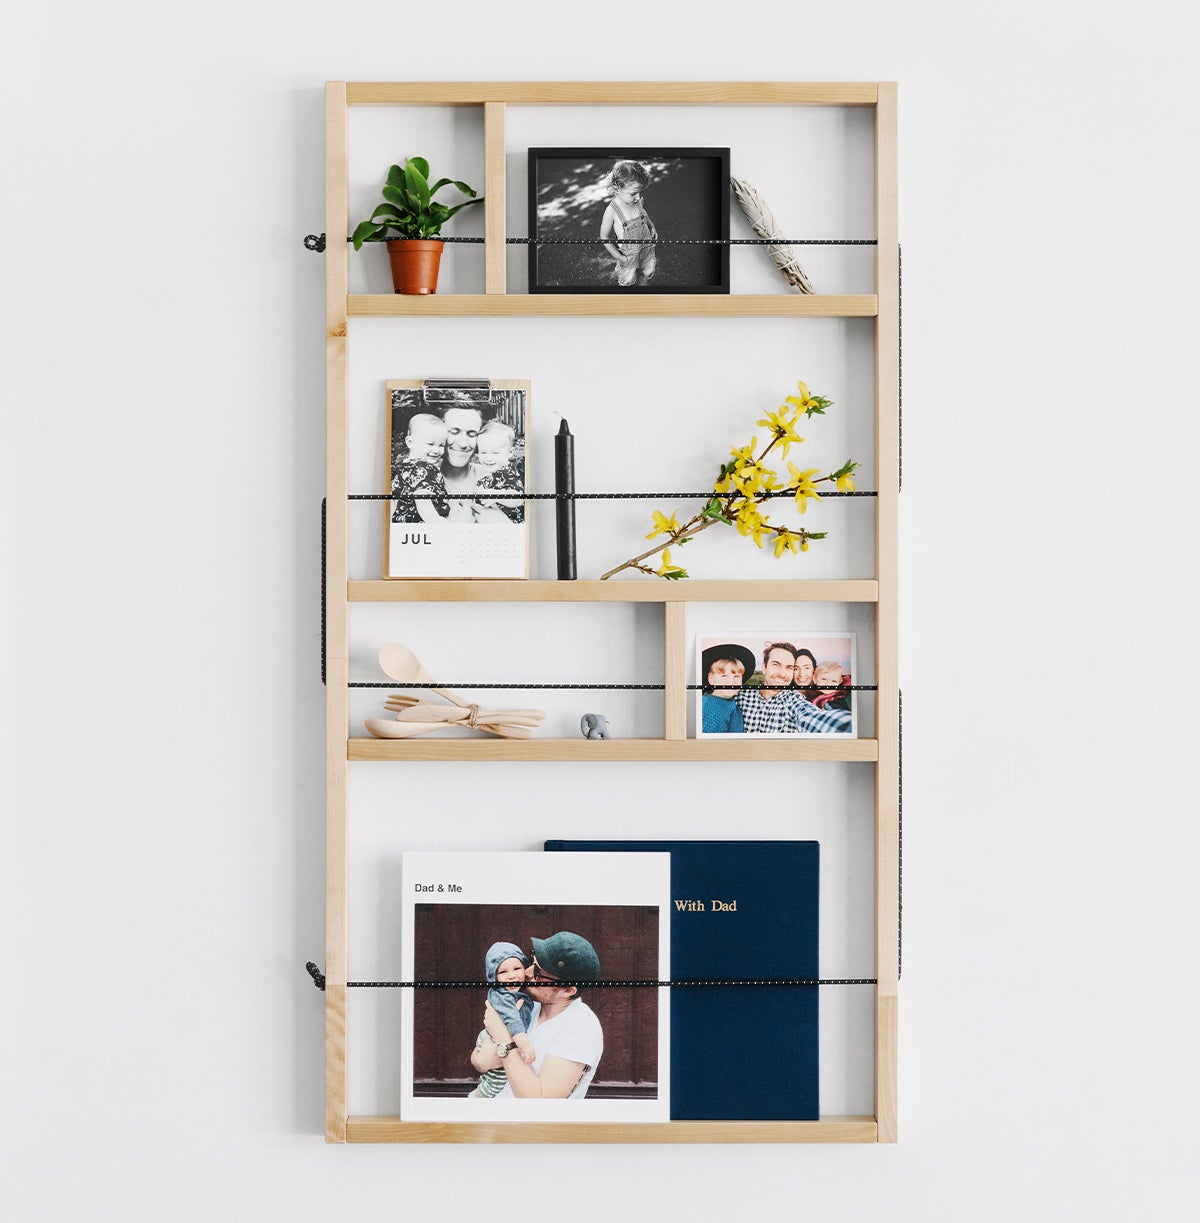 Wall-mounted shelf filled with photo-prints and other decor